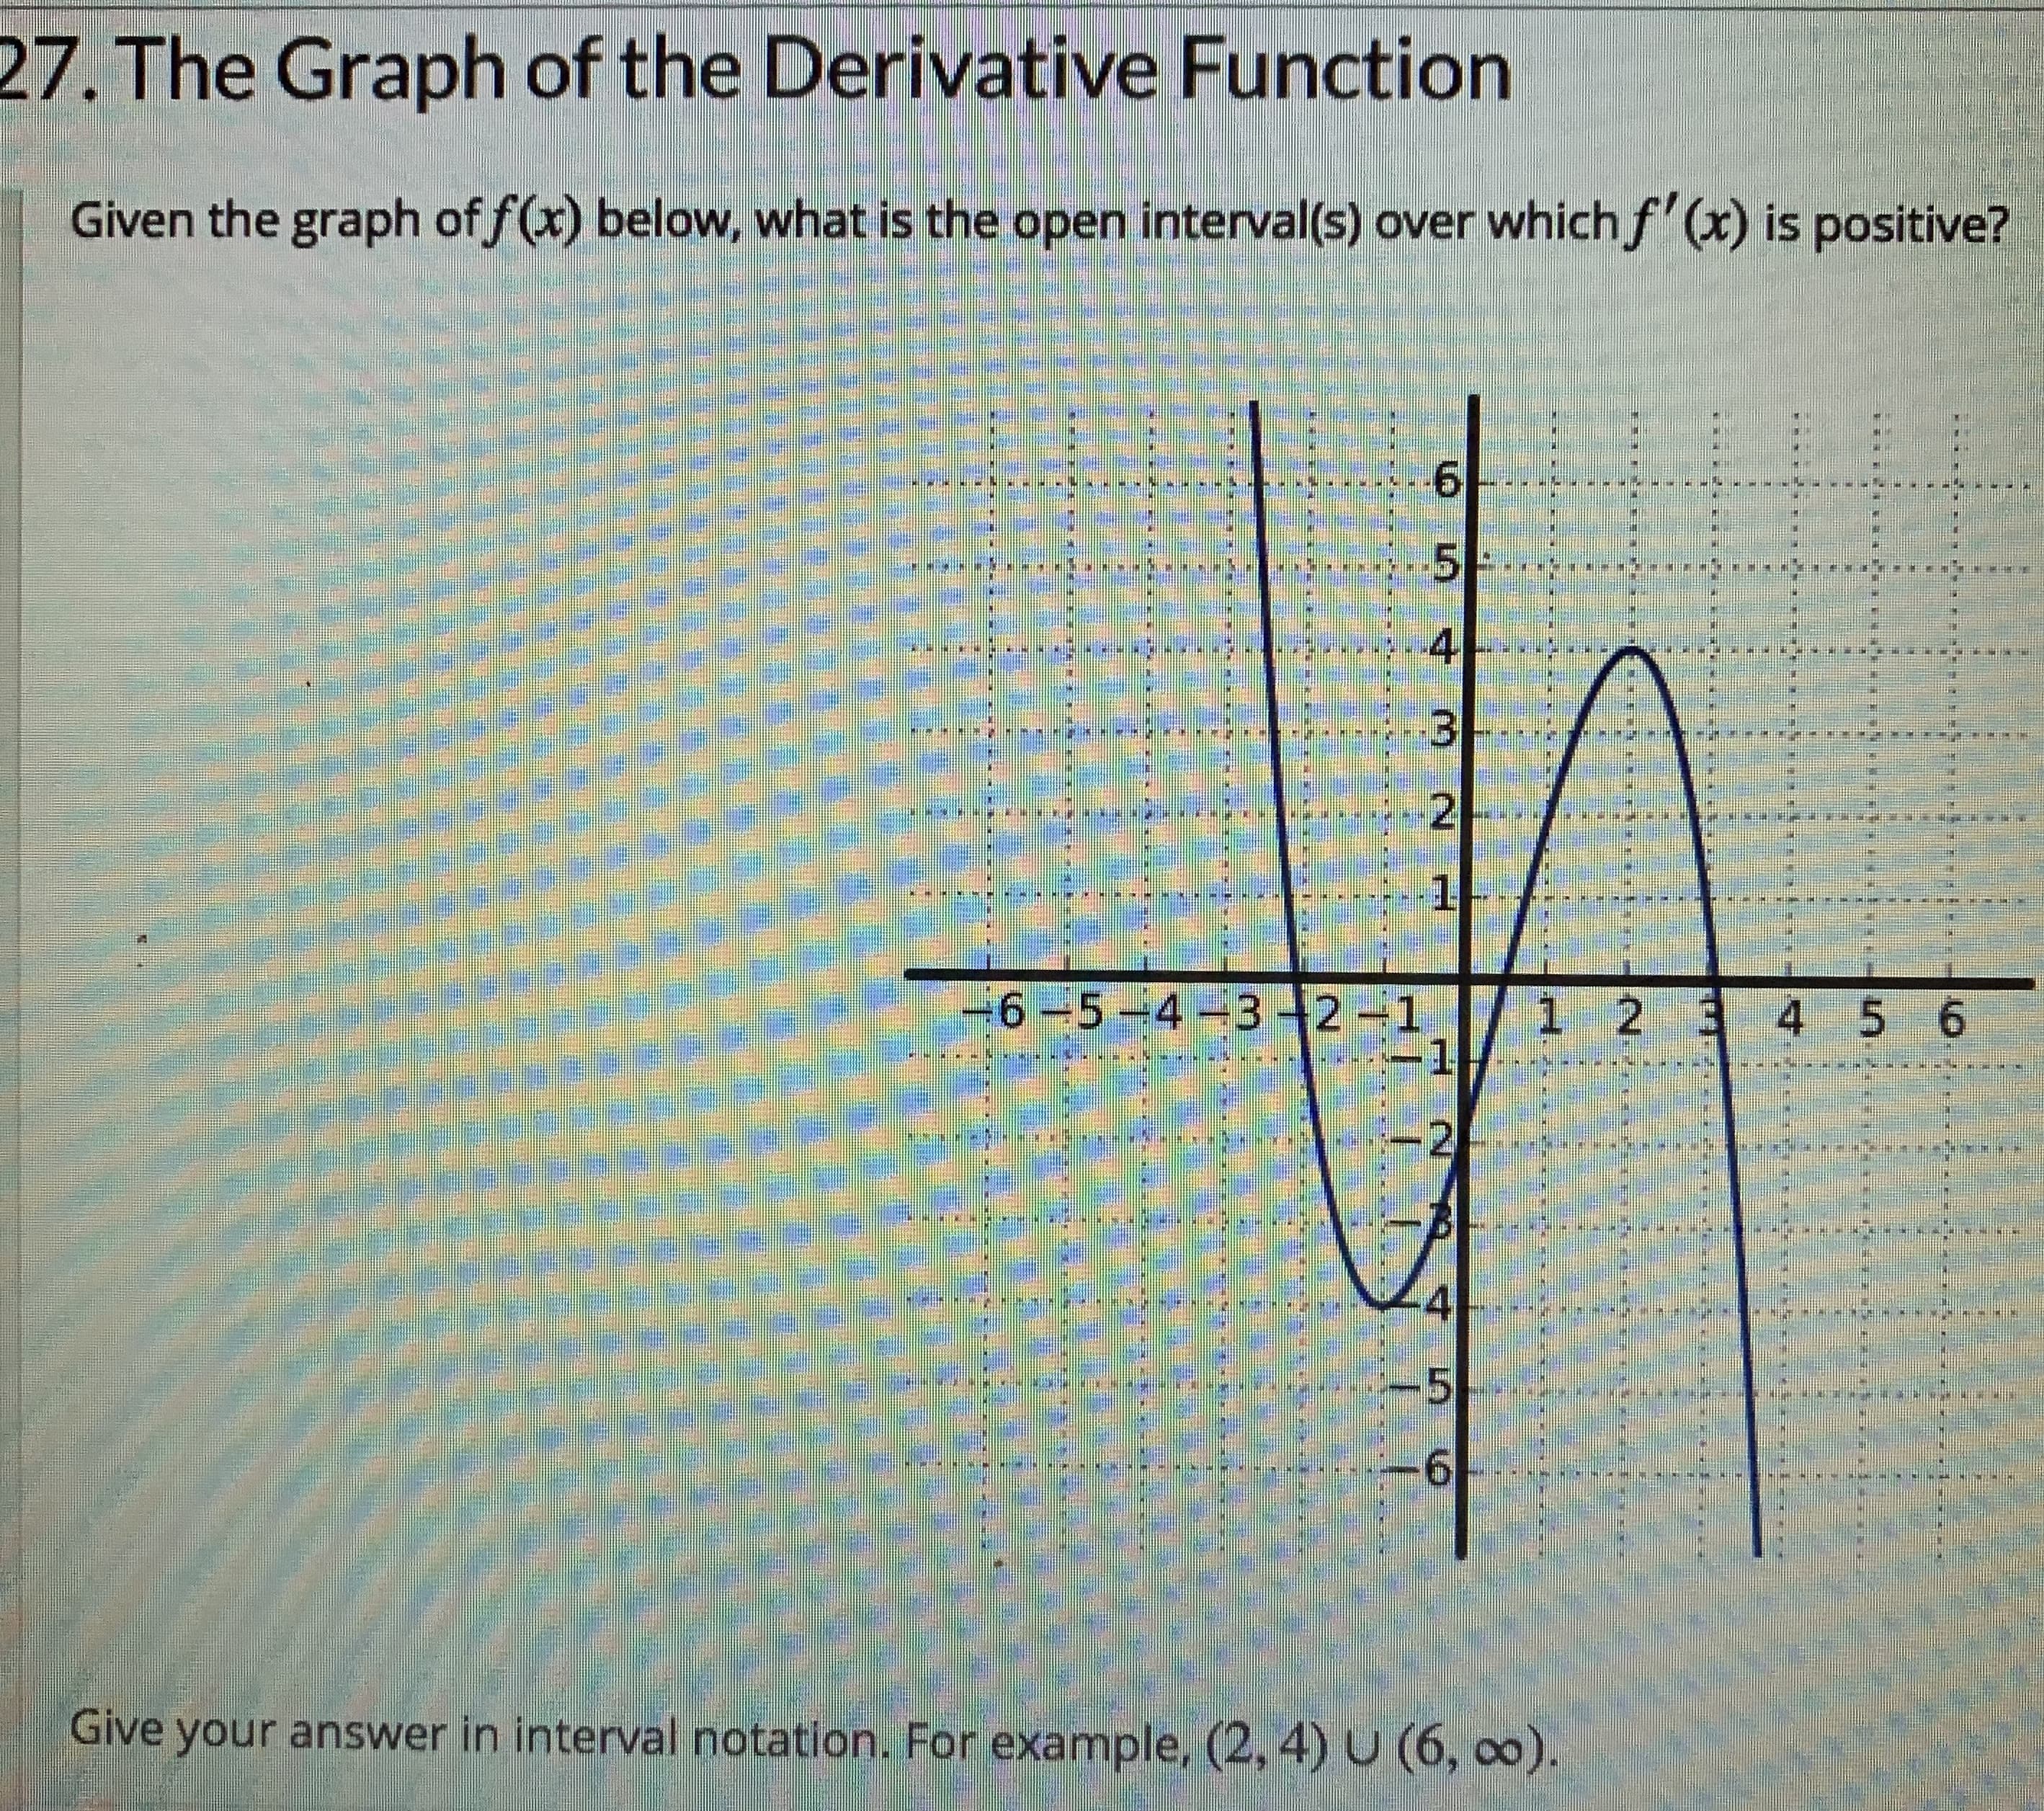 27. The Graph of the Derivative Function
Given the graph of f(x) below, what is the open interval(s) over which f'(x) is positive?
*---------
.5E..*·
2
1-
6-5-4-32-1
1 2 34 5 6
-2
********
.5 2
Give your answer in interval notation. For example, (2, 4) U (6, co).
4.
9.
